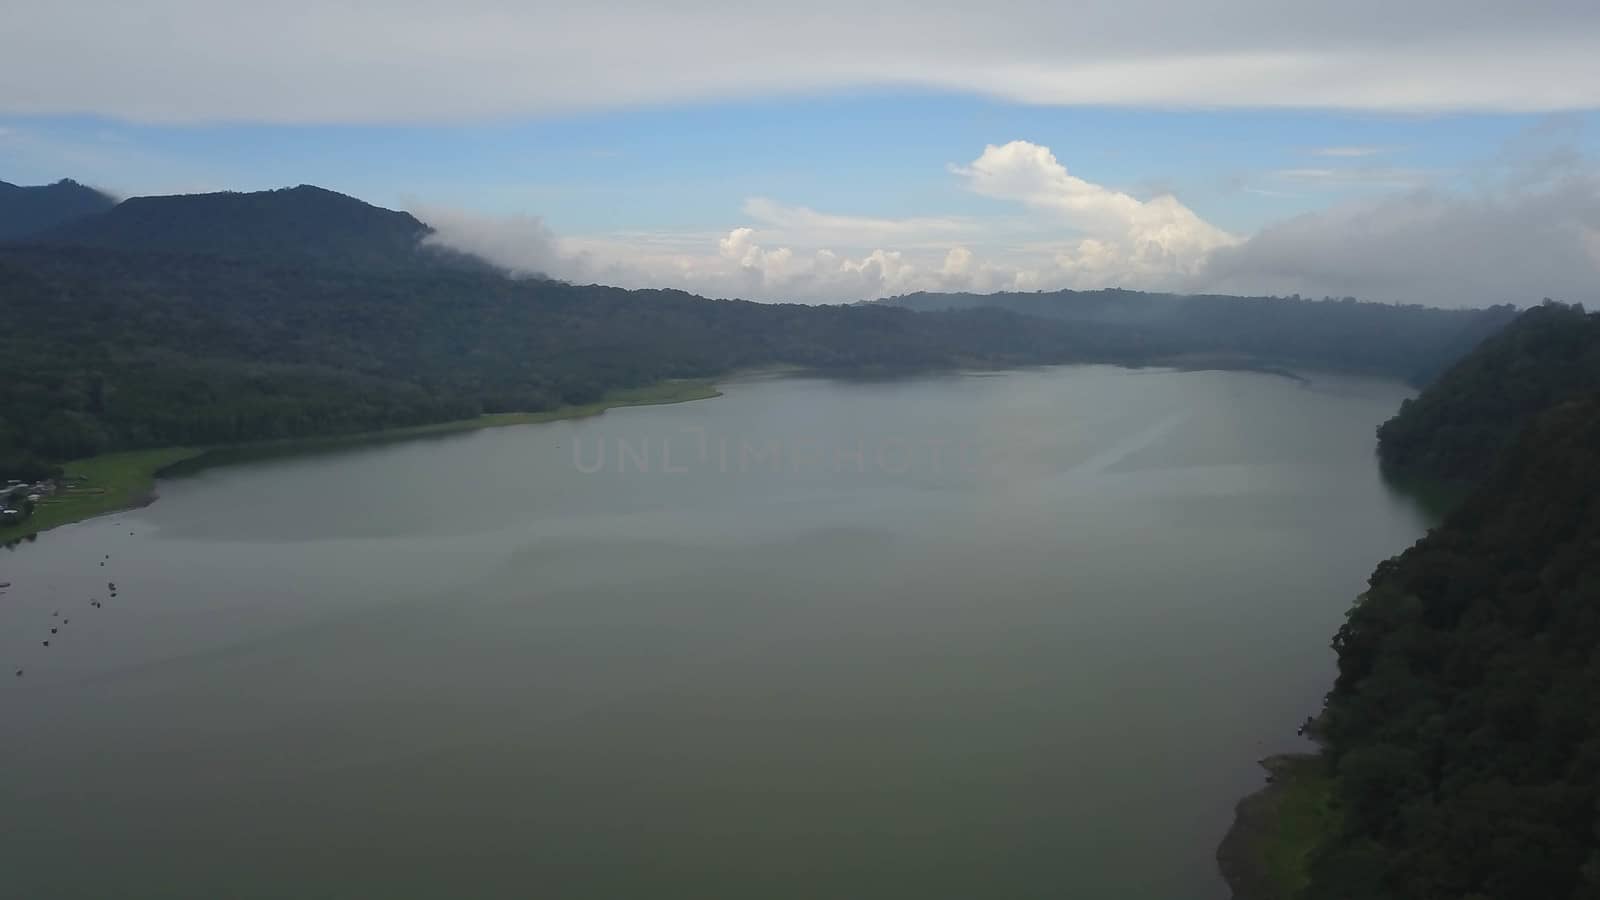 Beatiful aerial drone view over the lake. Lake and mountain view from a hill, Buyan Lake, Bali by Sanatana2008